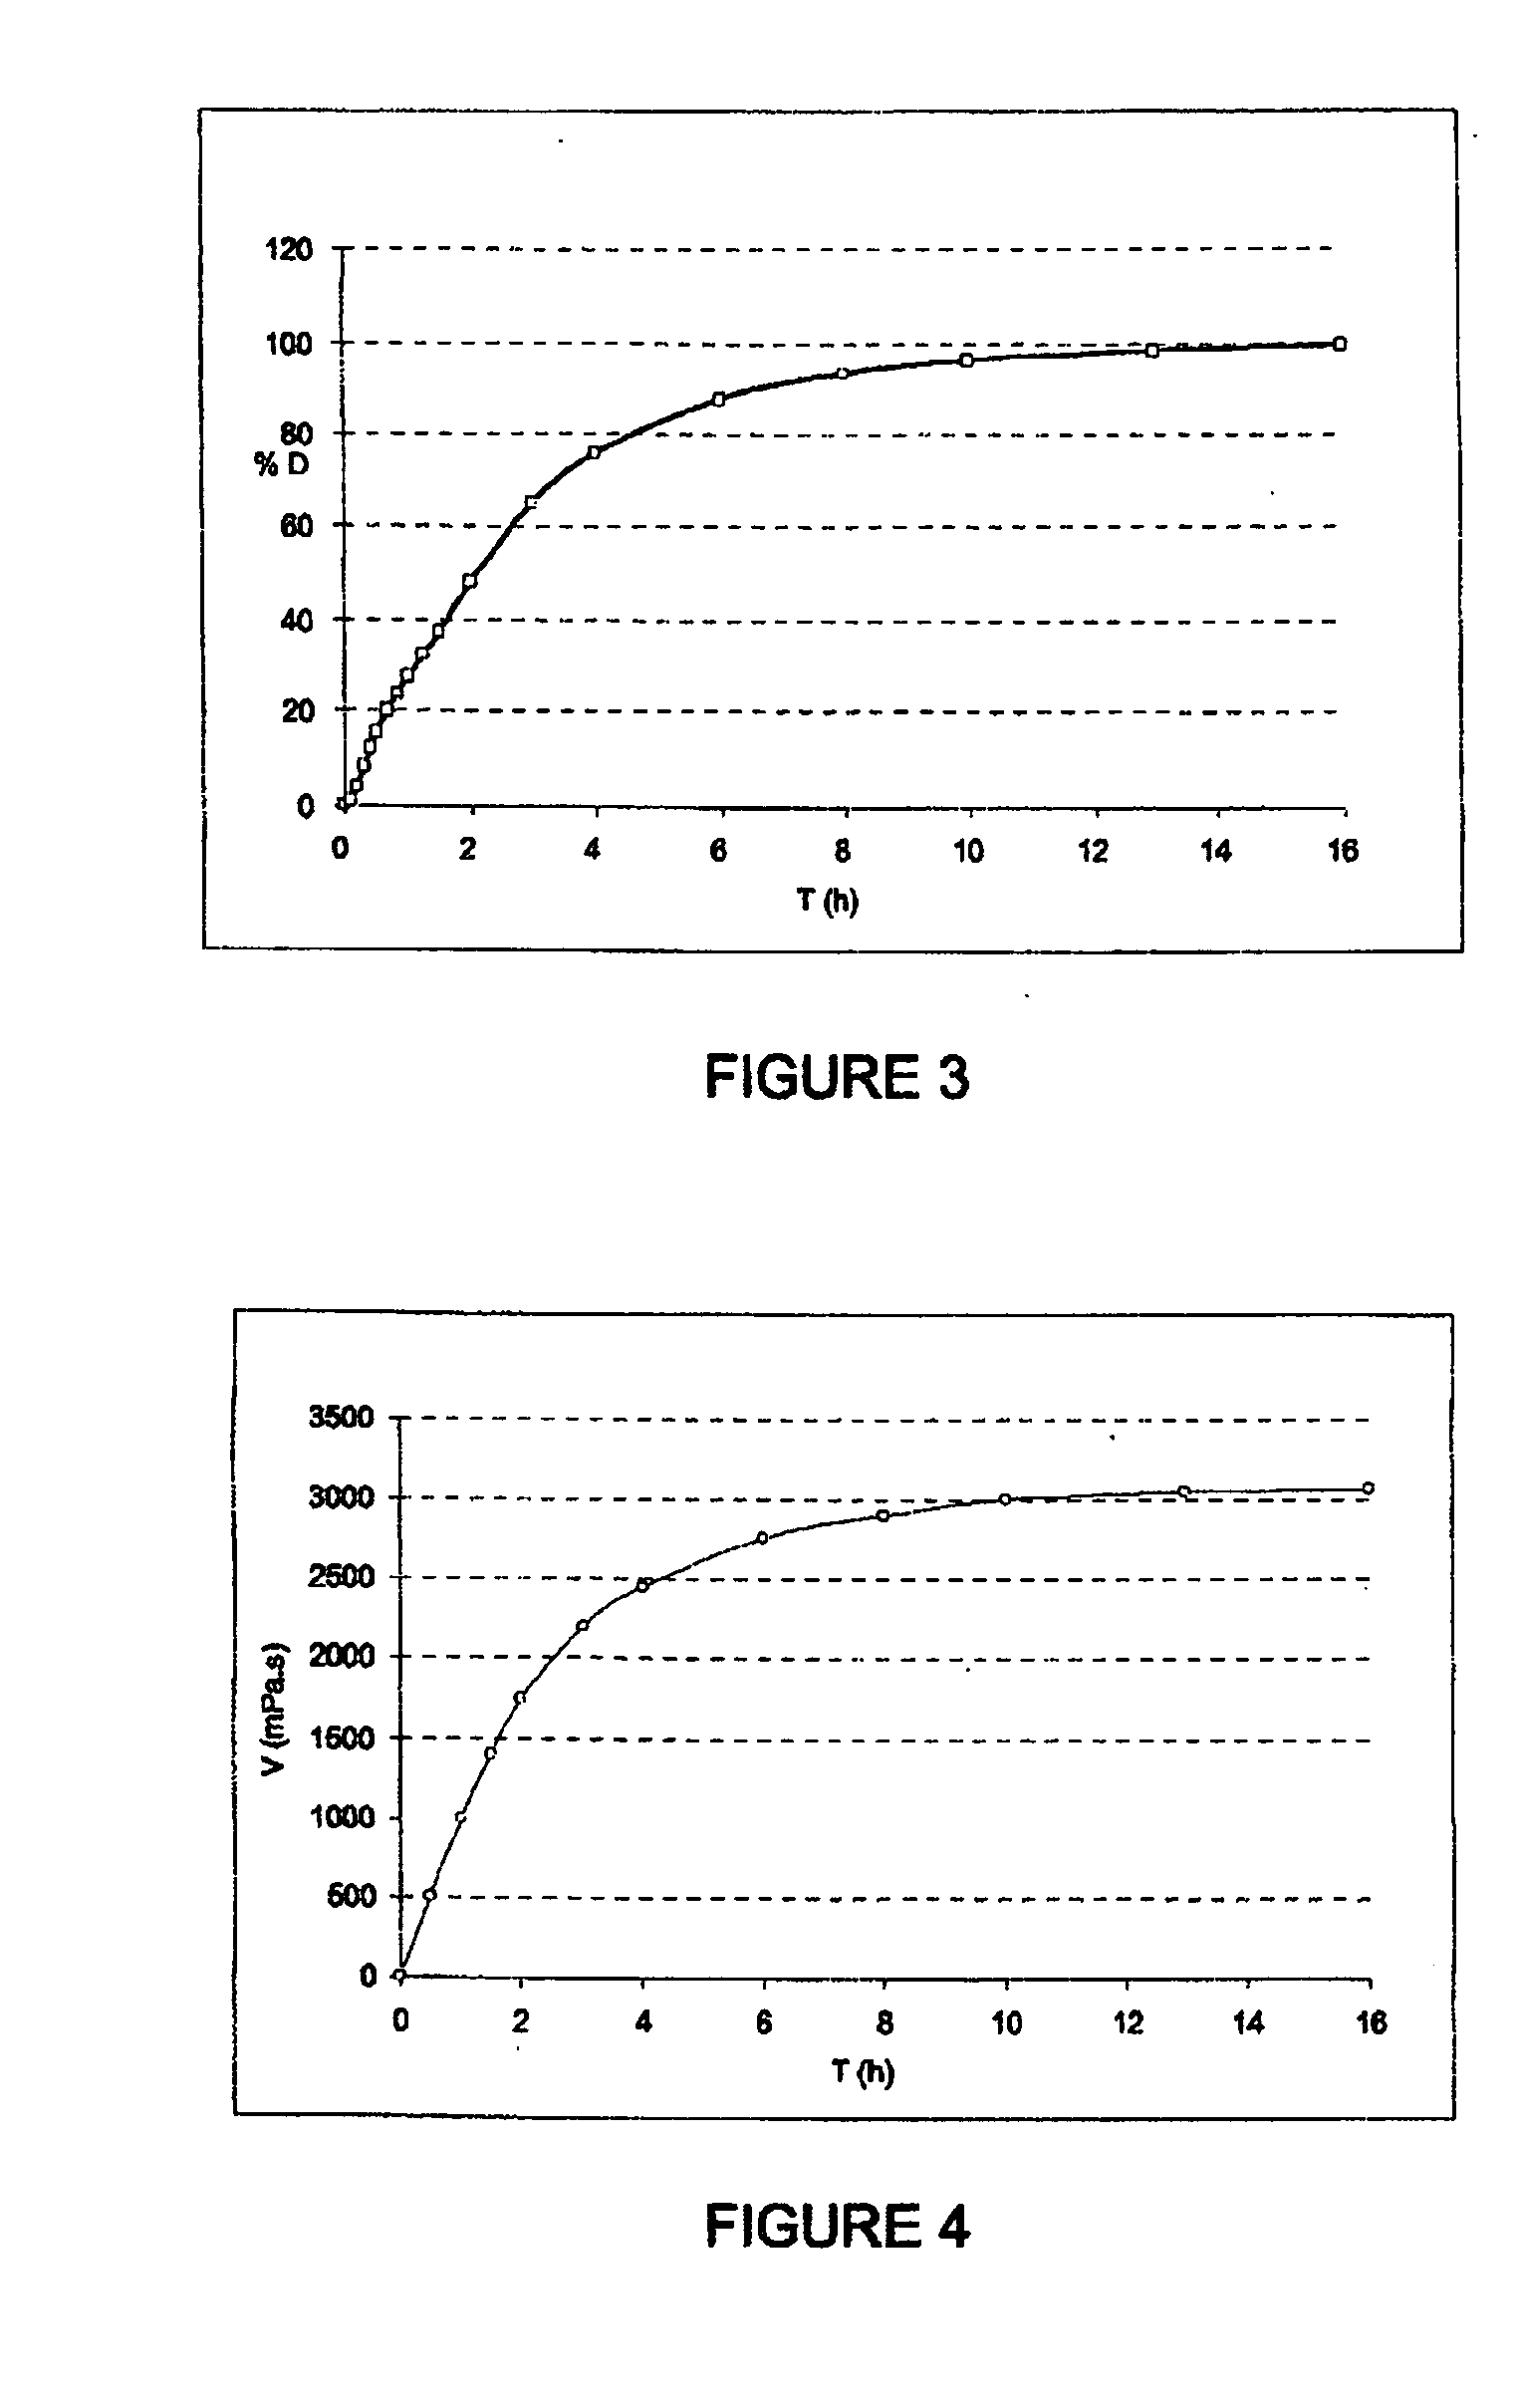 Anti-Misuse Microparticulate Oral Drug Form